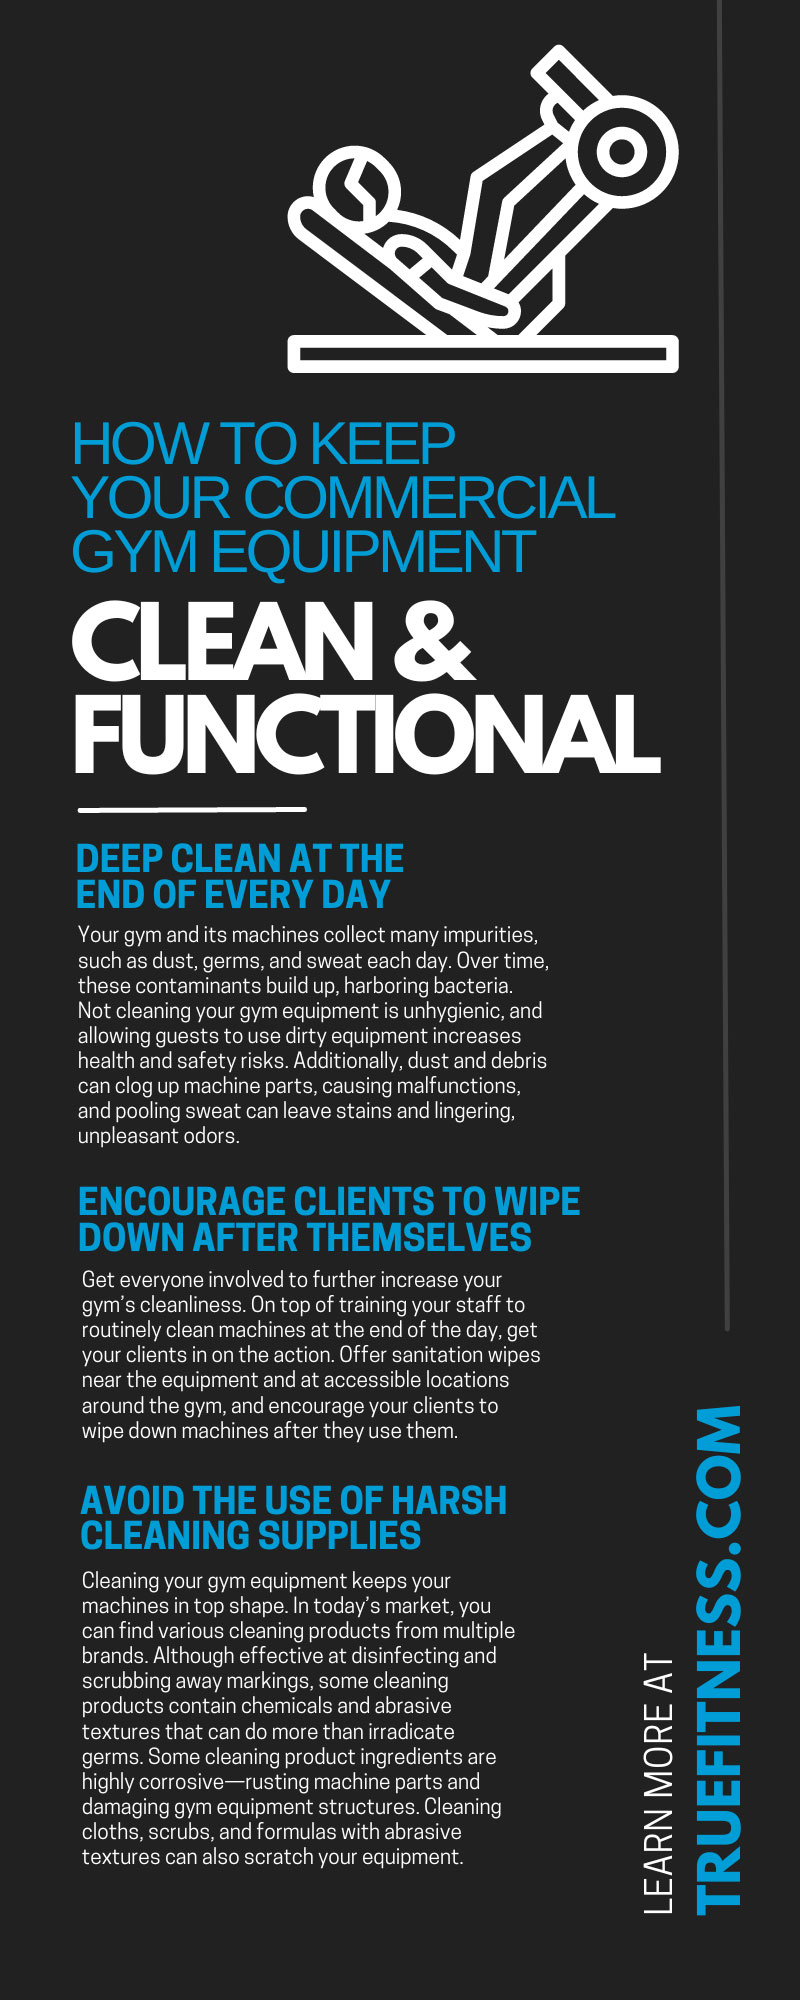 How To Keep Your Commercial Gym Equipment Clean & Functional